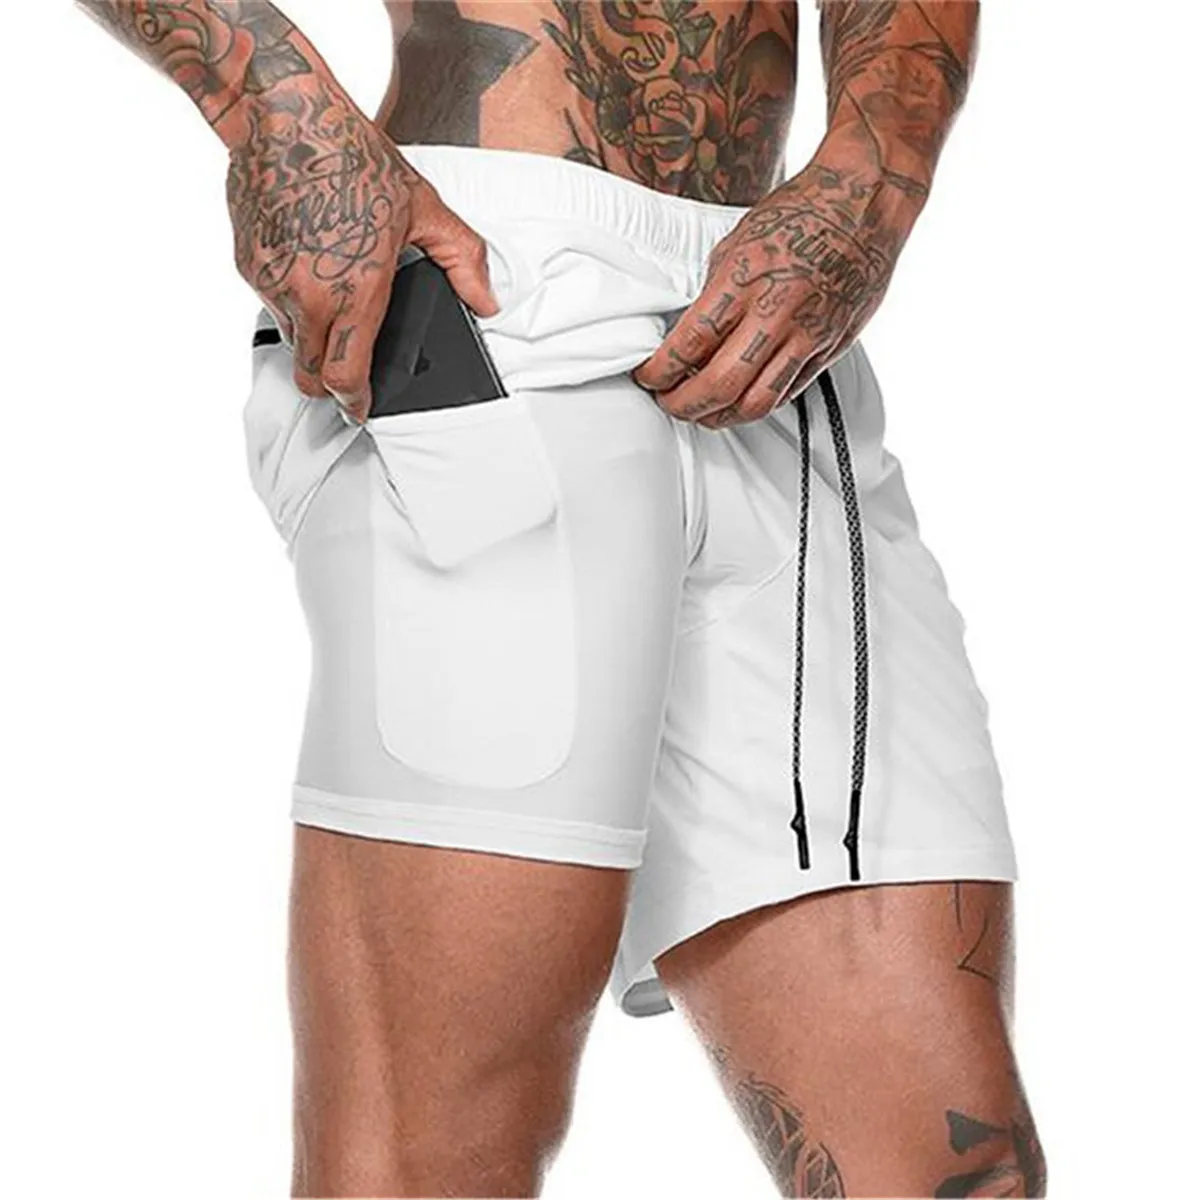 High Quality Double-deck Athletic Fitness Running Sport Workout Lining Gym Short With Phone Pocket Men's Boxer White Shorts